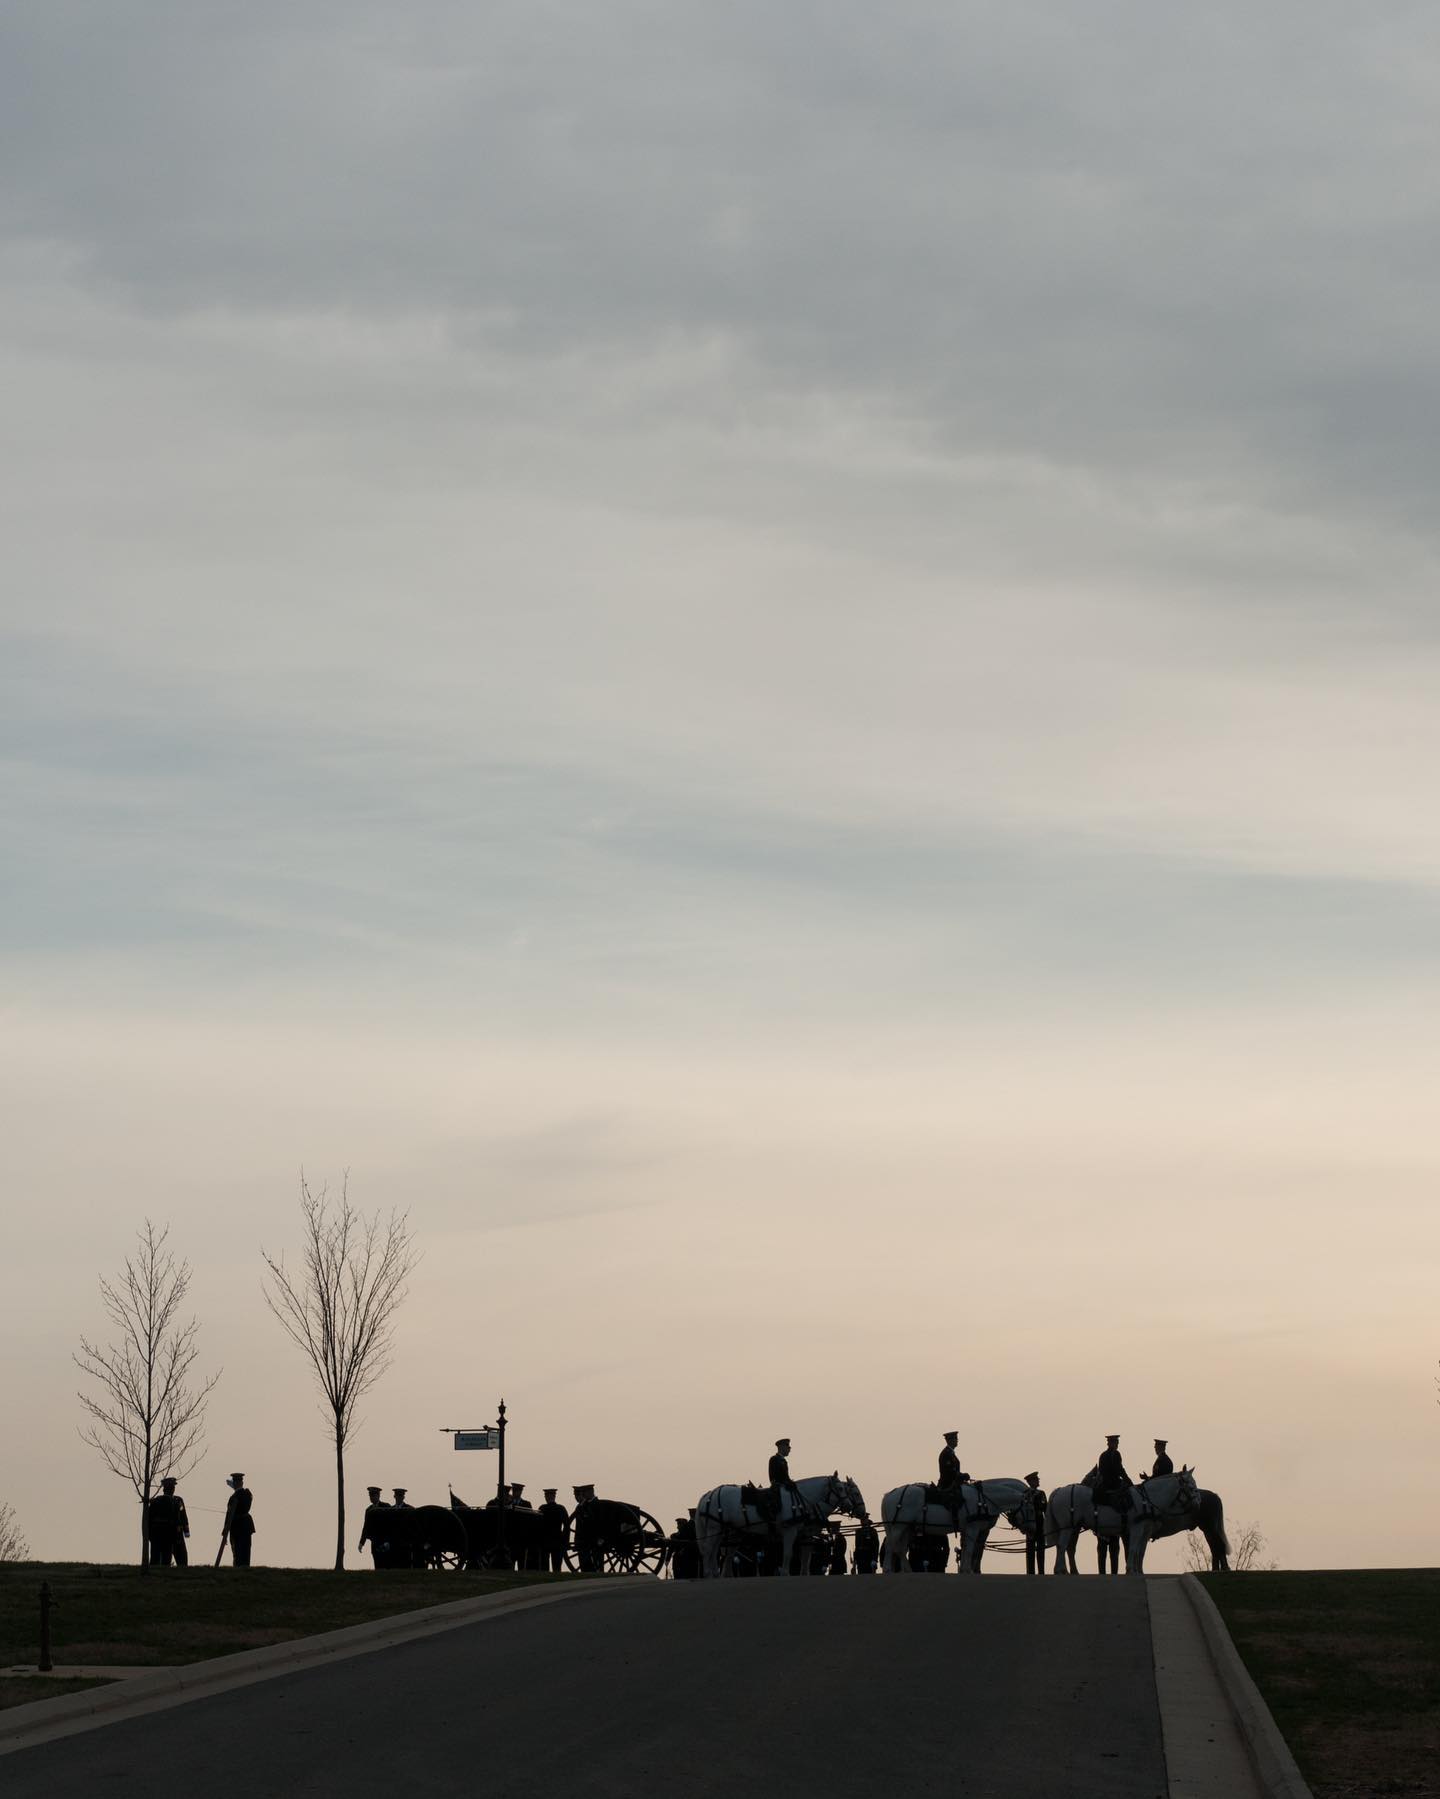 Soldiers from the 3d U.S. Infantry Regiment (The Old Guard) Caisson Platoon conducted modified military funeral honors with funeral escort for a decorated Veteran earlier this month in section 57 of Arlington National Cemetery, Arlington, Virginia.

In this photo, they lay in wait at McClellan Circle as the last rays creep across Arlington National Cemetery.